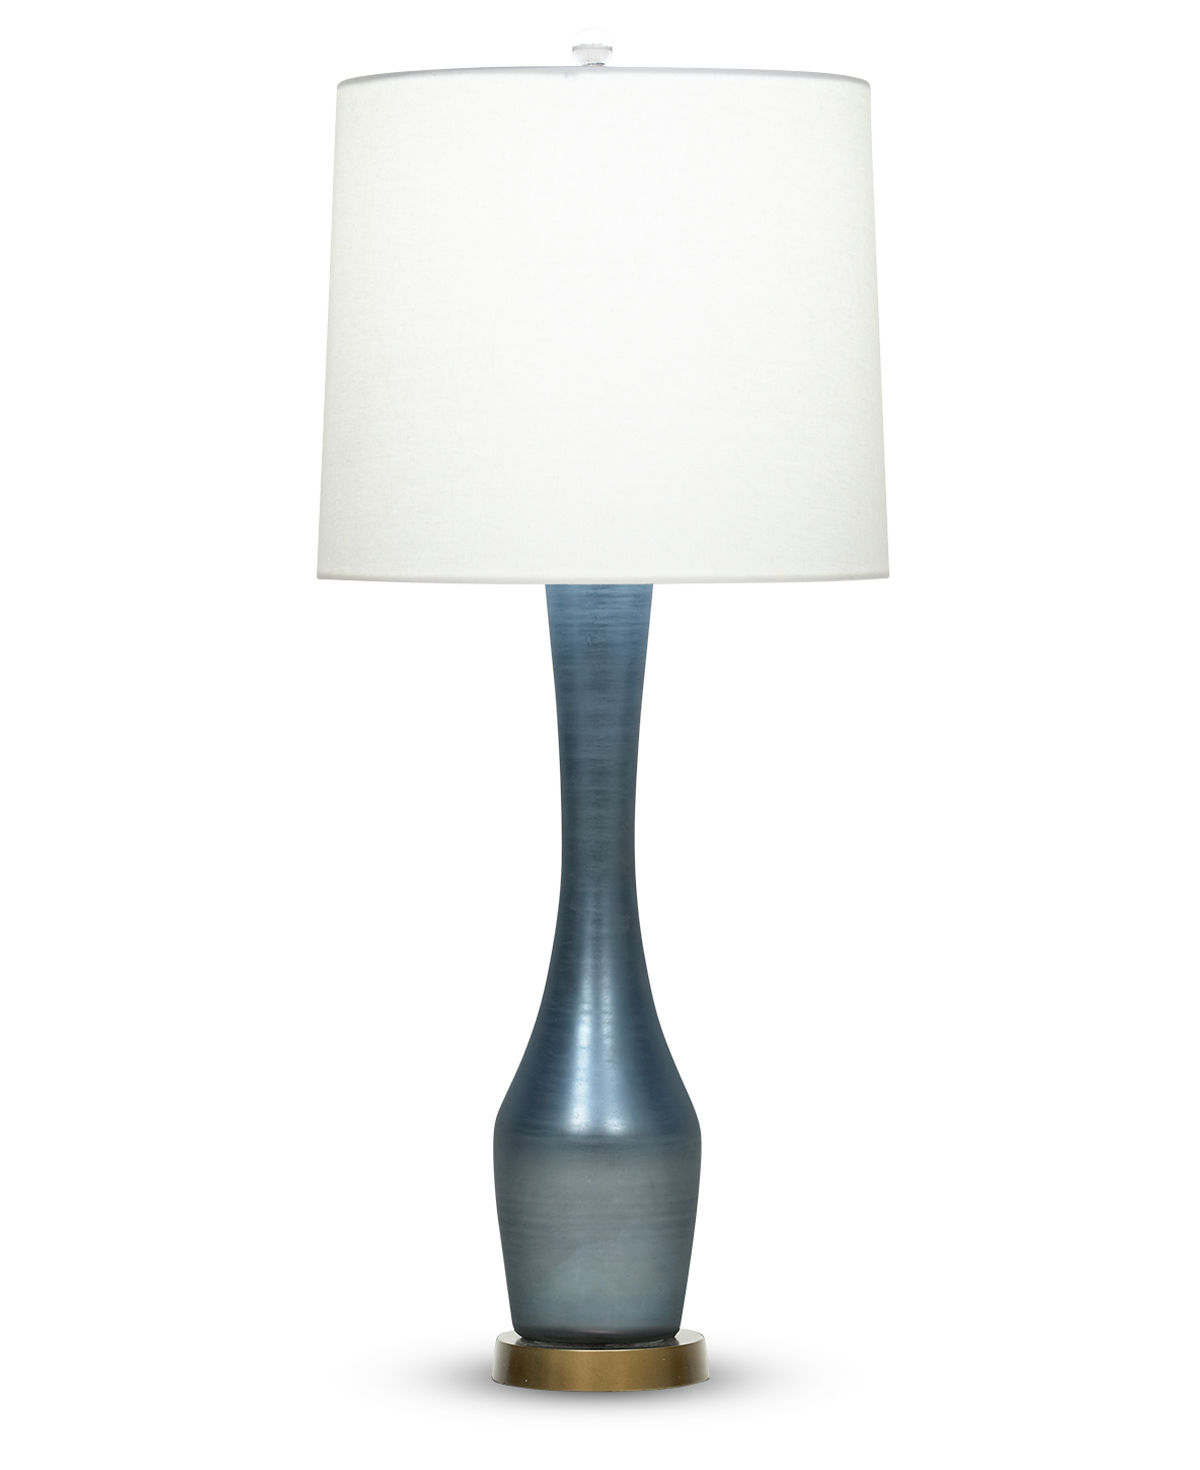 FlowDecor Roberts Table Lamp in mouth-blown glass with pearlescent blue finish and metal with antique brass finish and off-white linen tapered drum shade (# 3772)